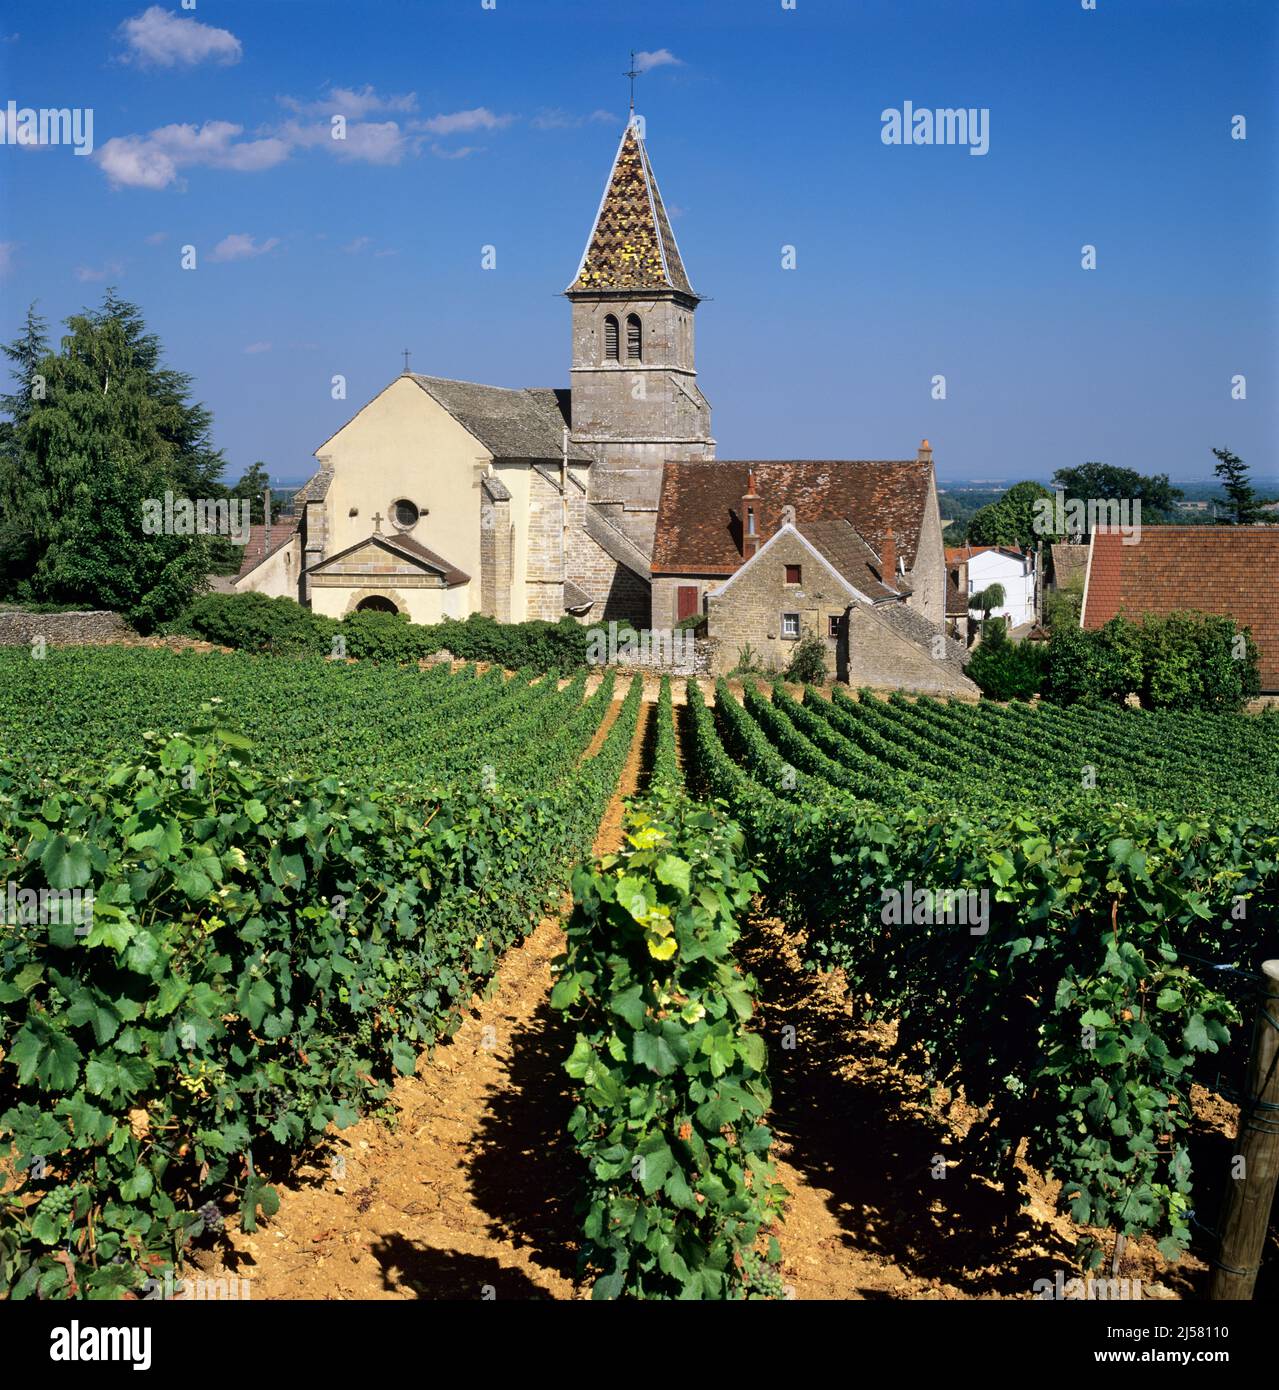 Vineyards below the church in village of Fixin on the Grand Crus route, Fixin, Cote d'Or, Burgundy, France, Europe Stock Photo